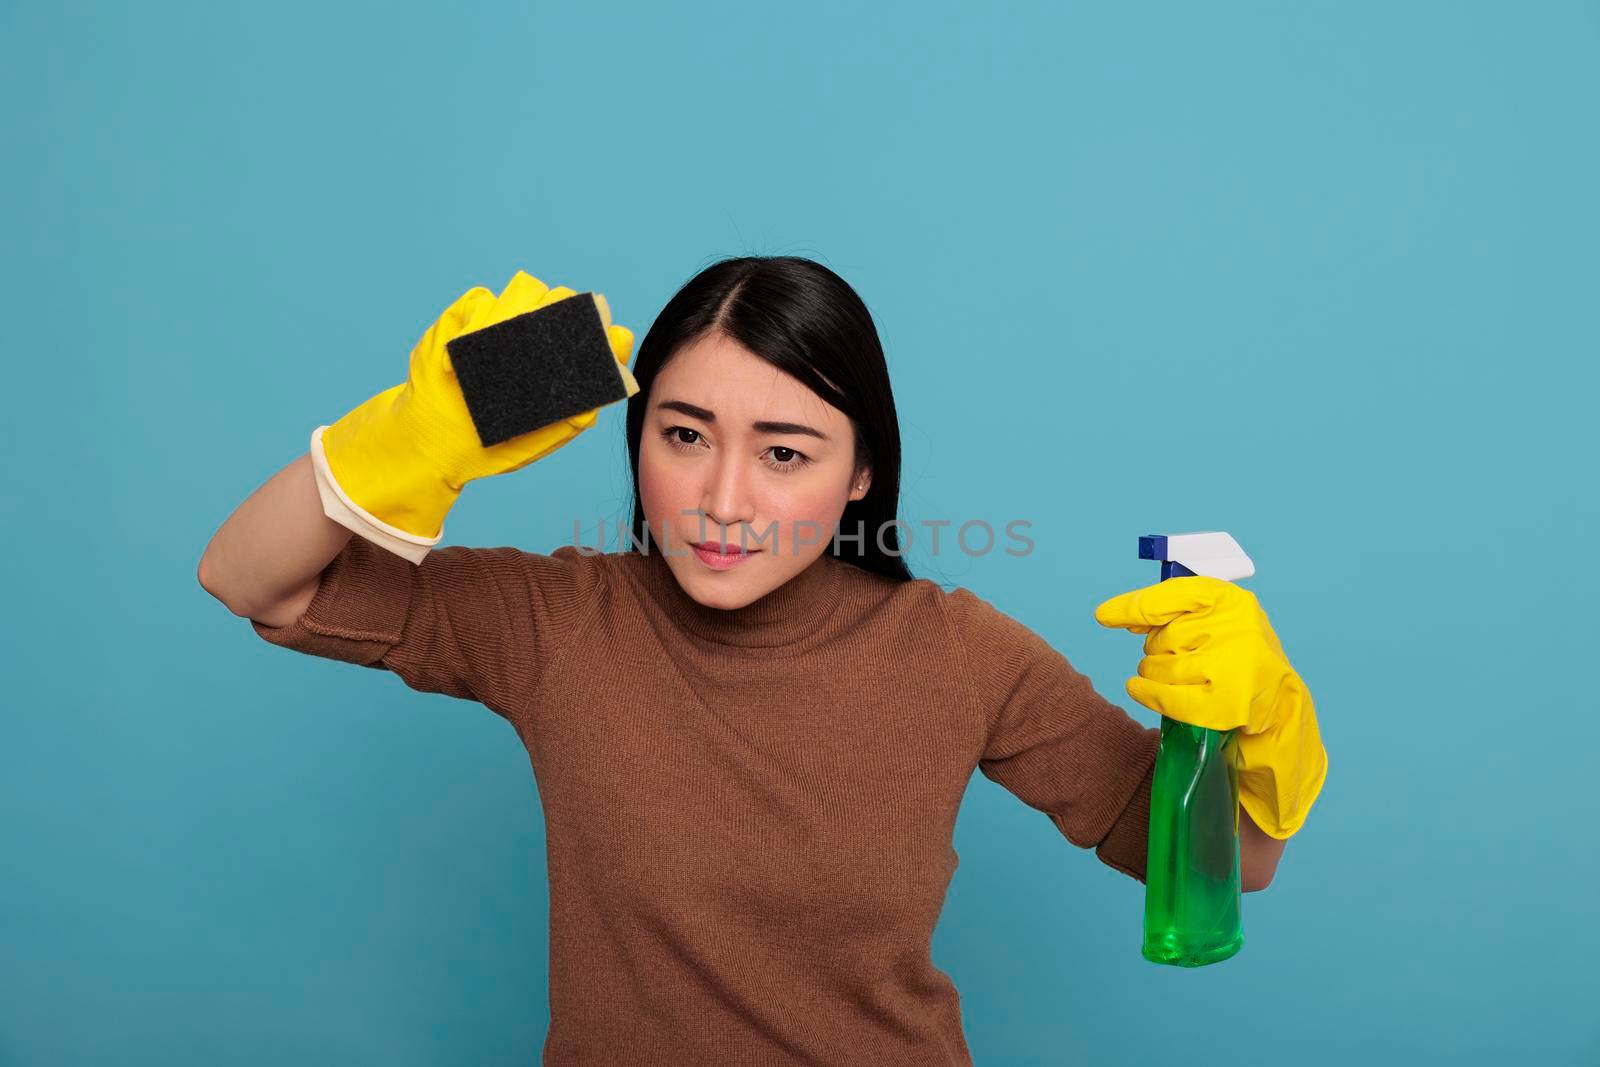 Portrait of serious young woman wearing yellow gloves holding a sponge detergent sprayer isolated on a blue background, Housewife worker, Cleaning home concept, Female angry face expression